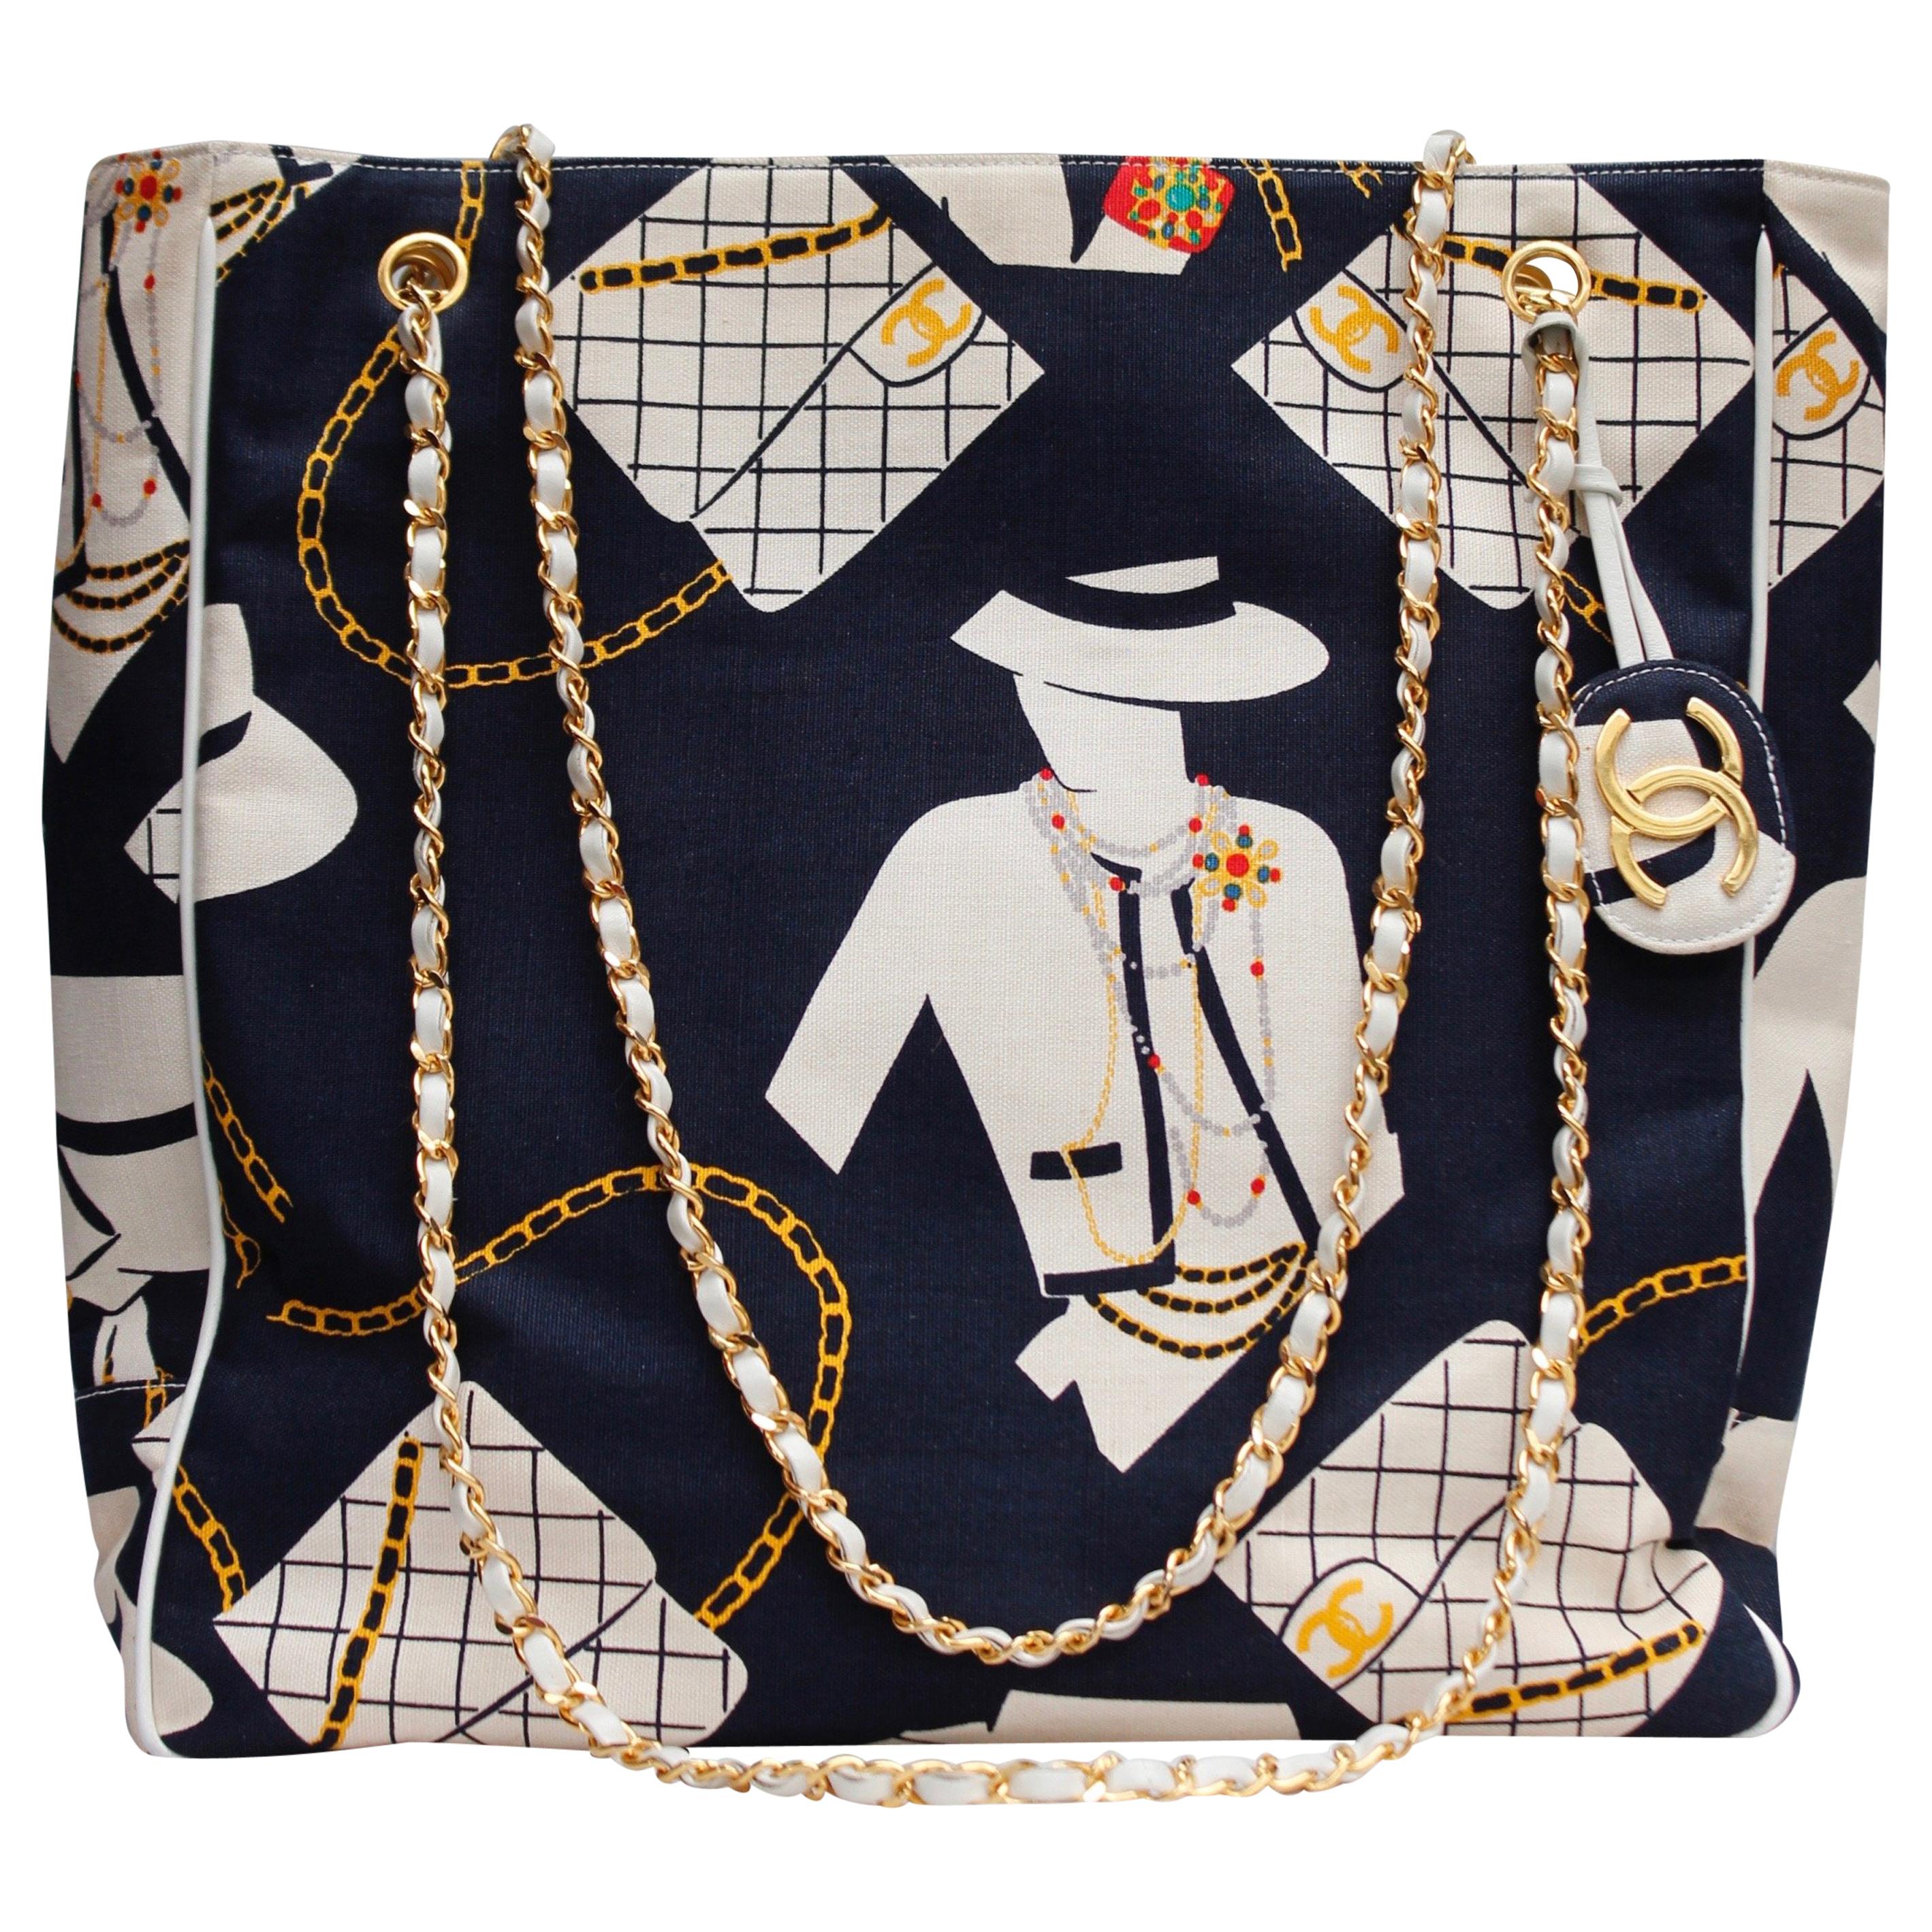 Chanel “Coco Silhouette”s collector shopping bag in navy blue canvas For Sale